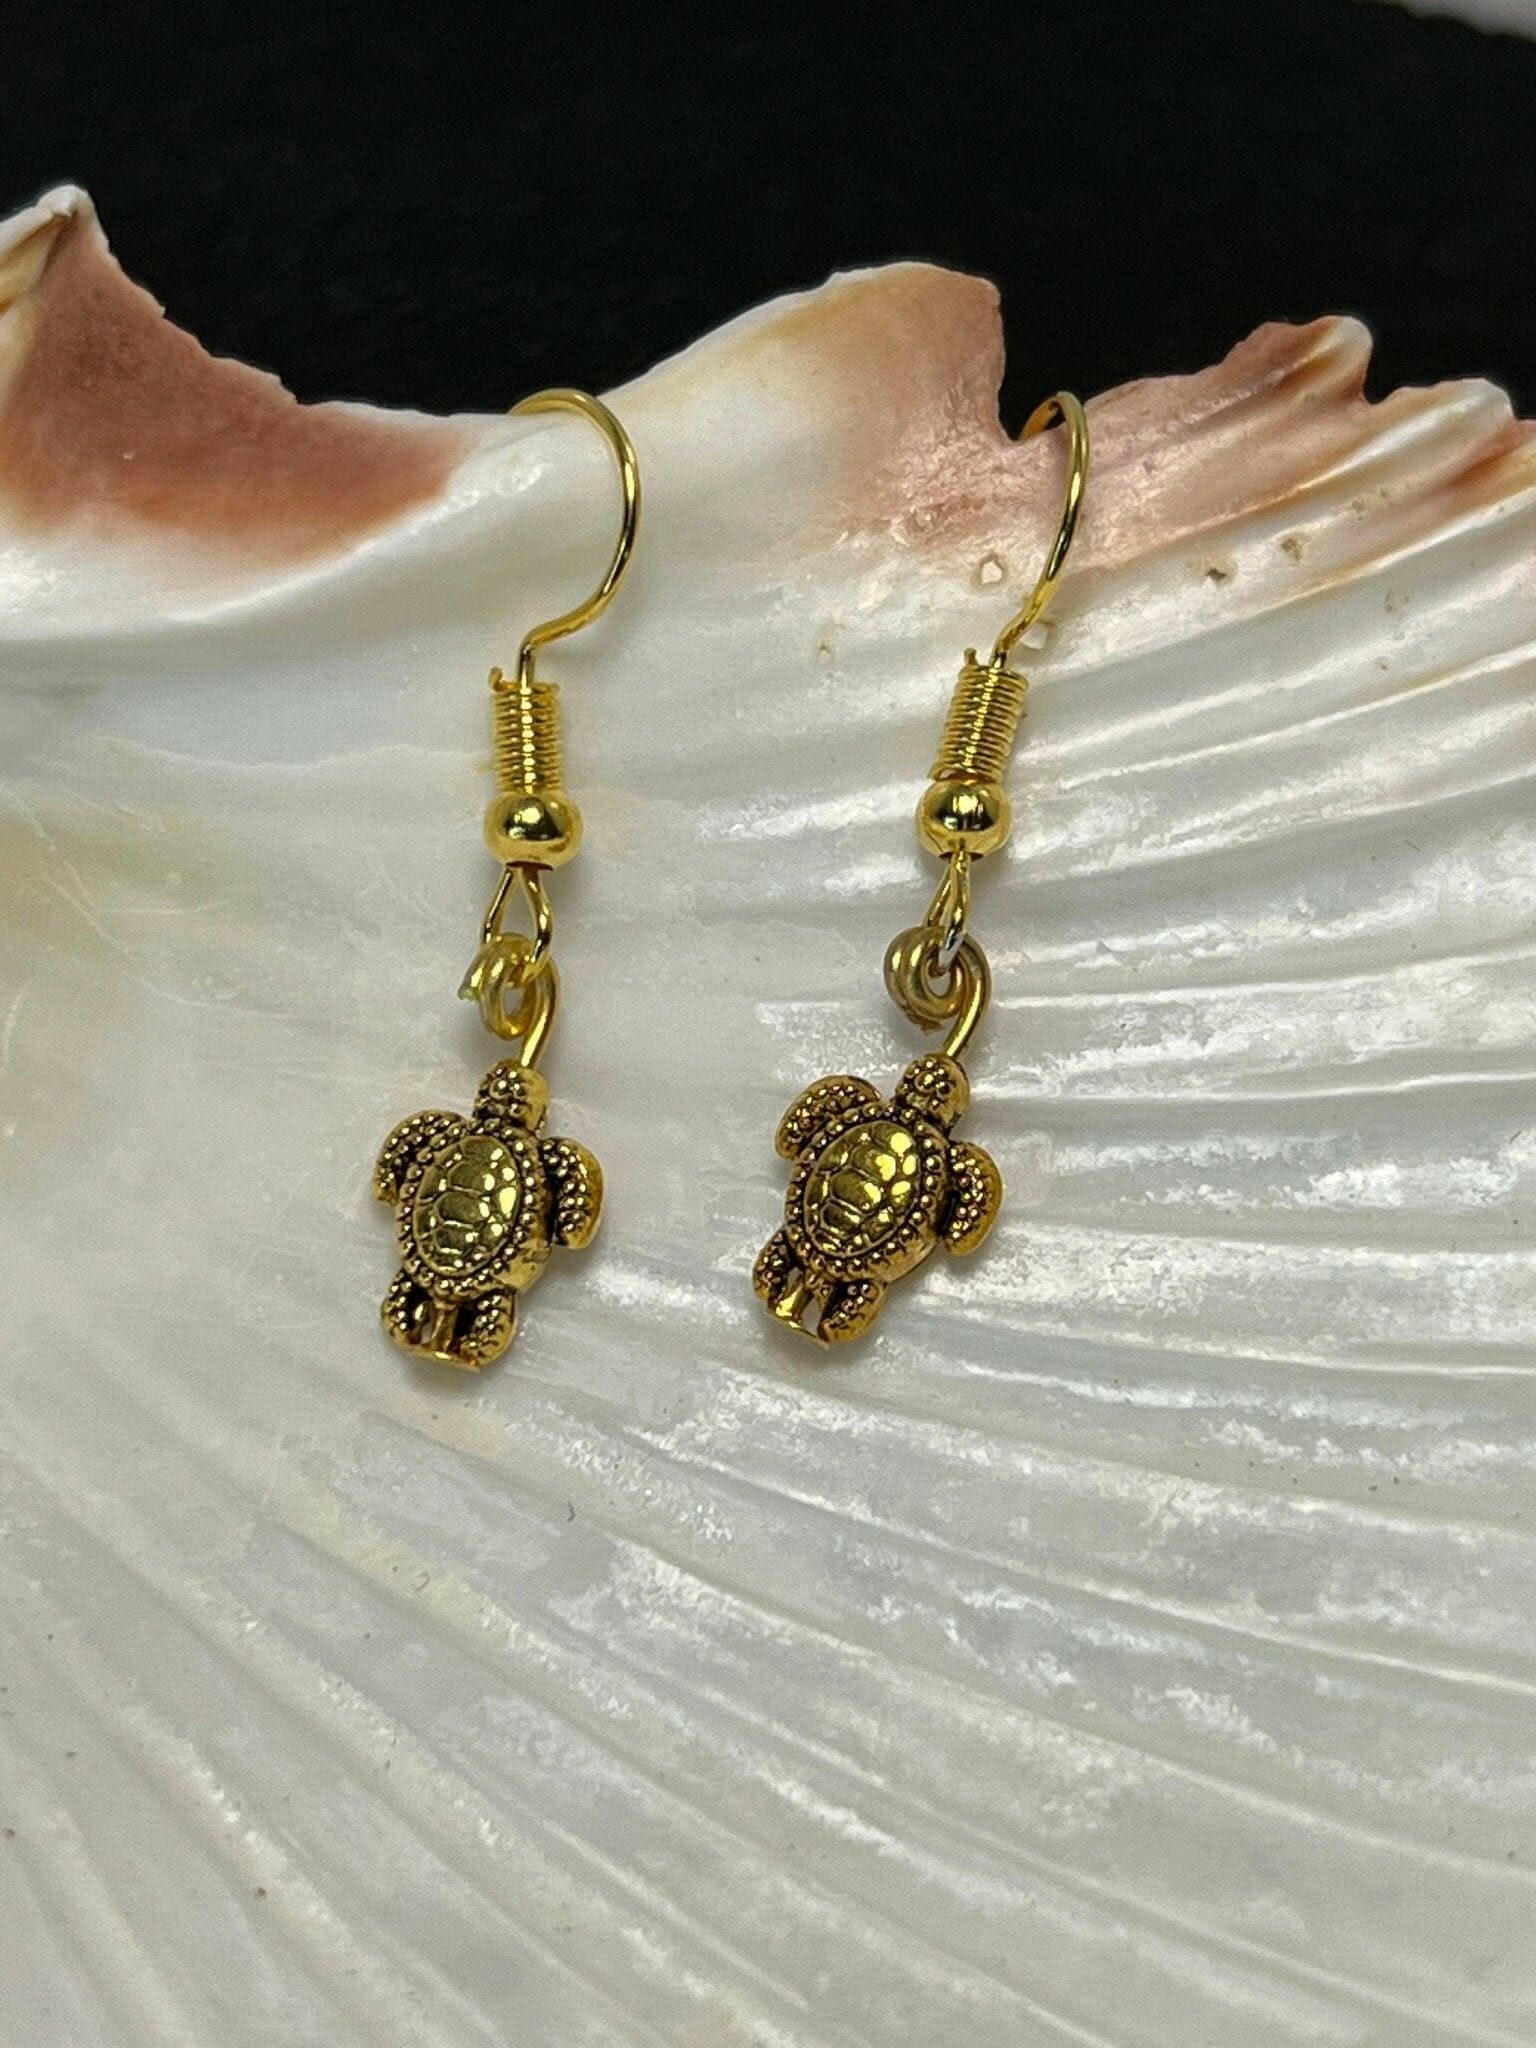 Bec Sue Jewelry Shop earrings 1 / gold plated / gold Turtle Earrings, Tortoise Charms Tags 409